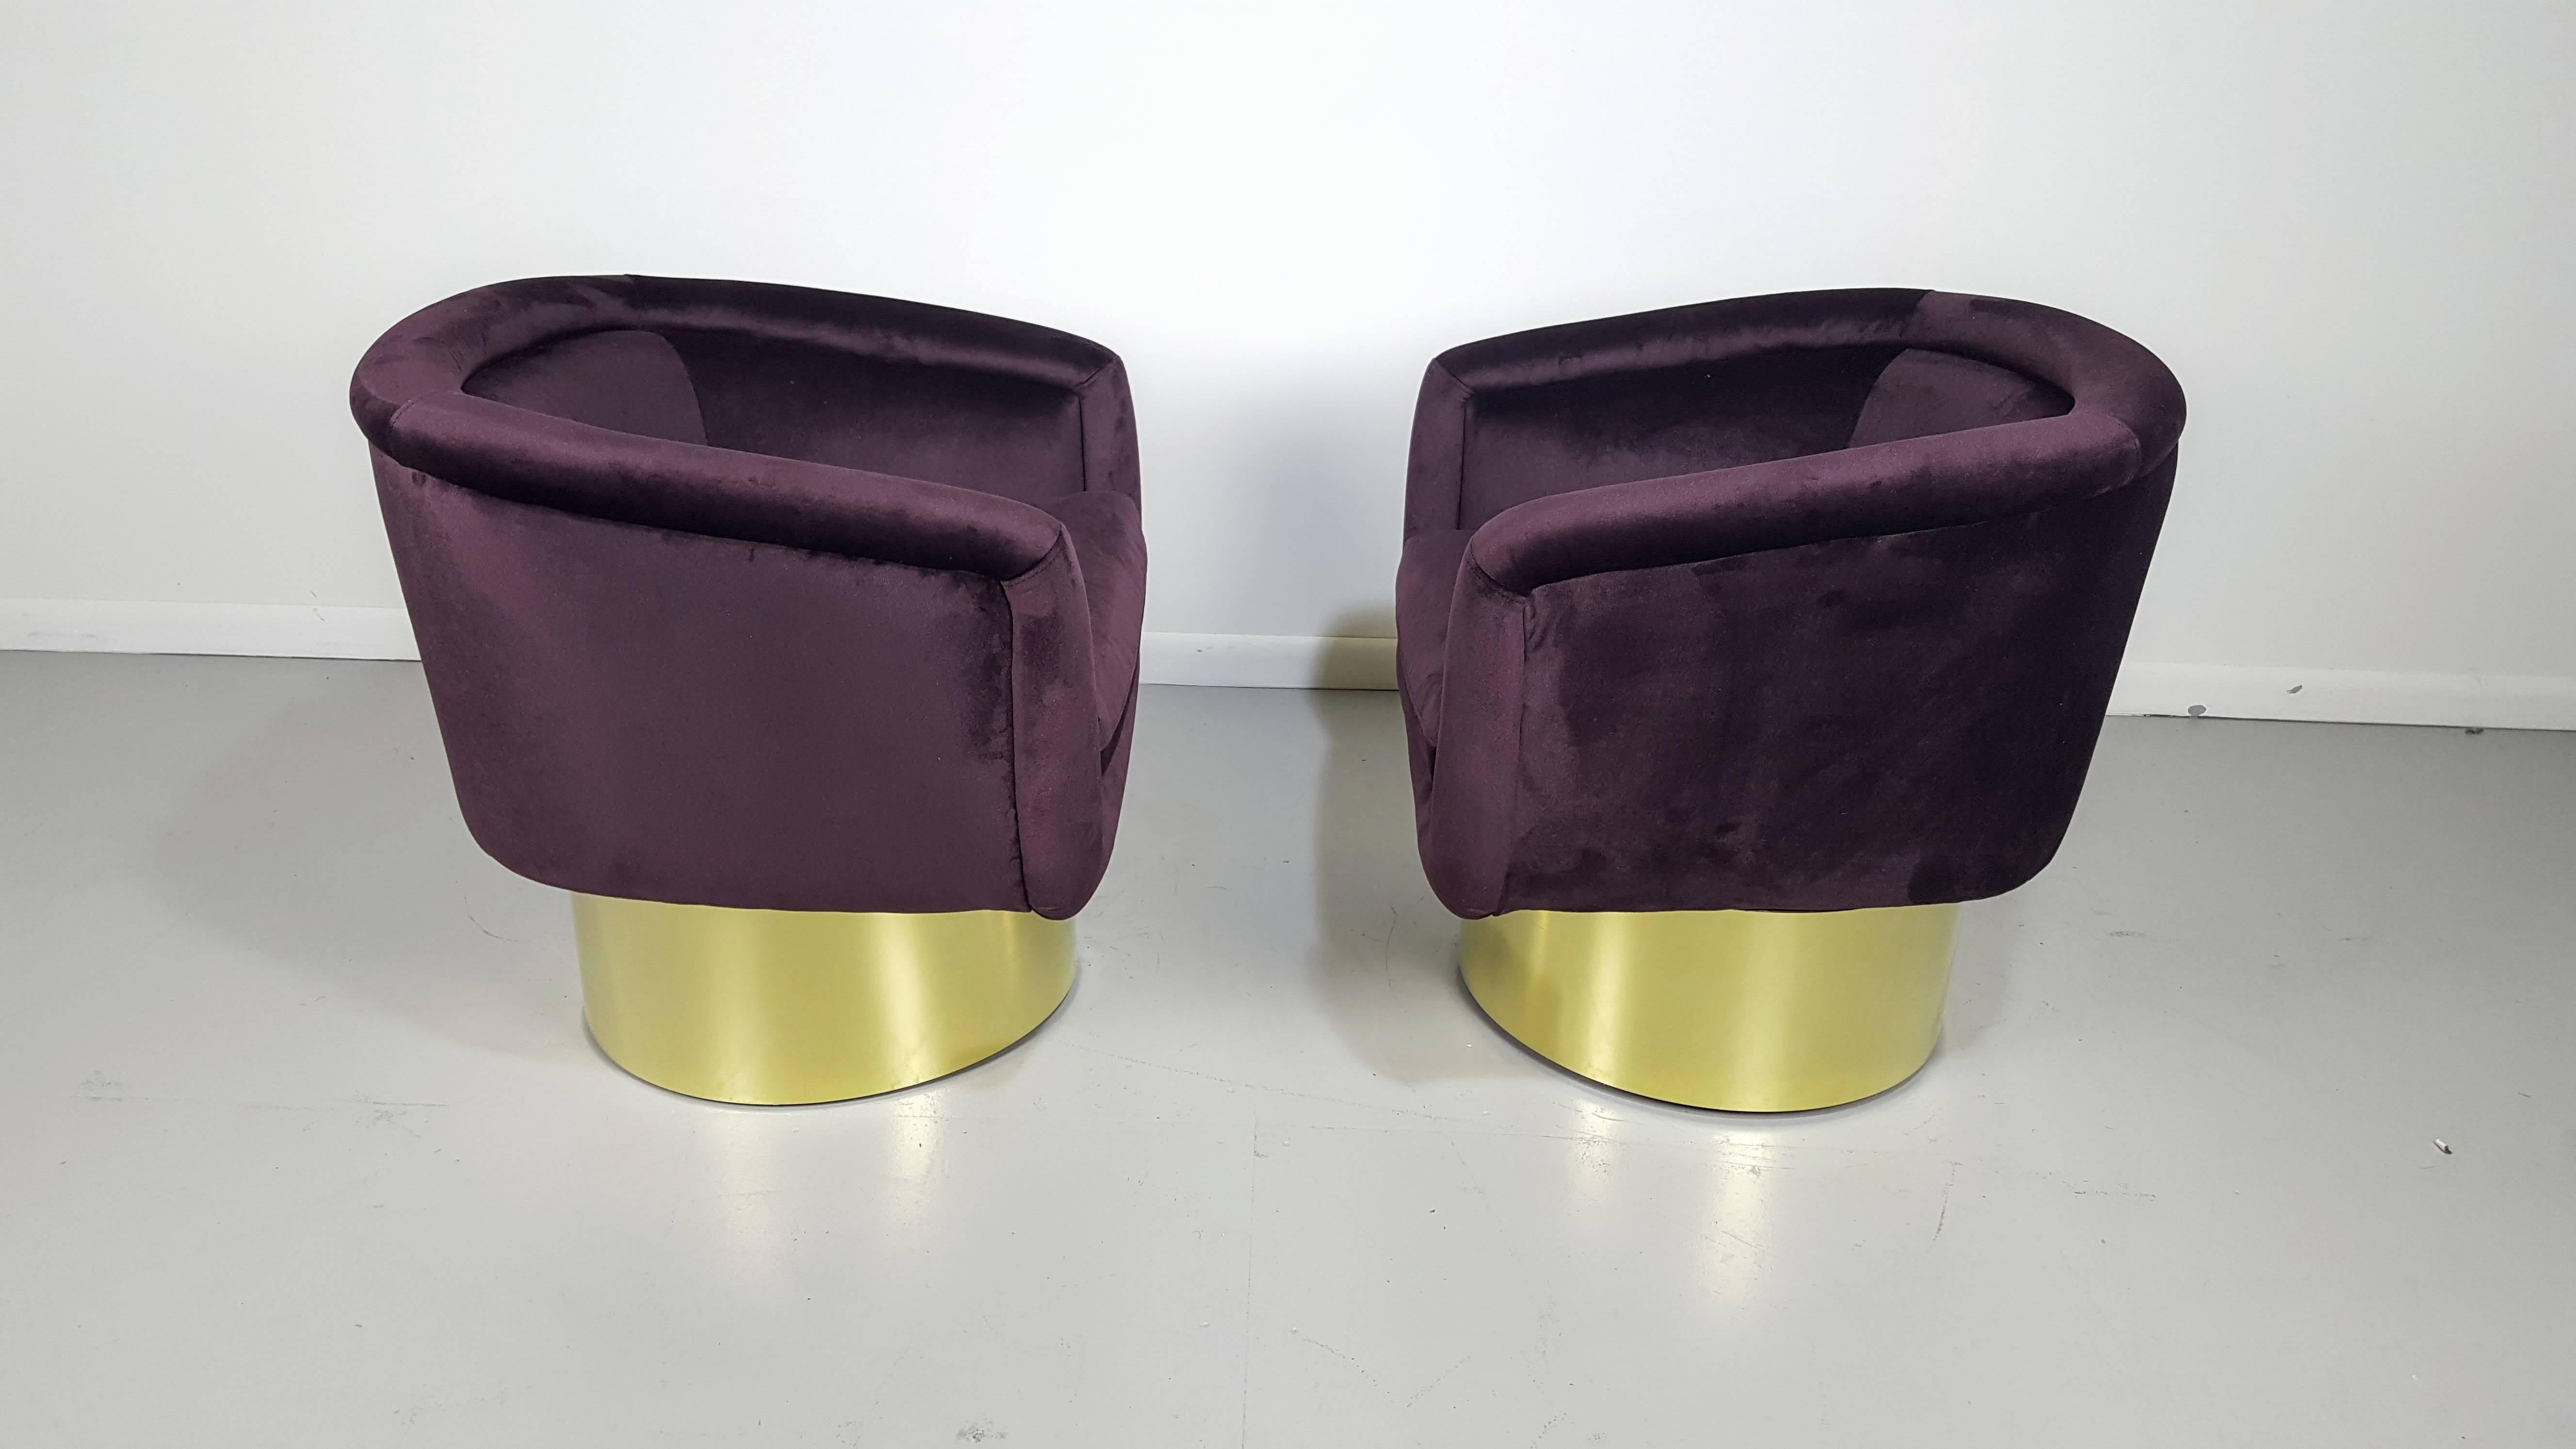 Luscious swivel lounge chairs in Aubergine velvet with polished bronze bases. Designed by Leon Rosen for Pace Collection, 1970s. Fully restored. Very comfortable. Heavy and well-made.

We offer free regular deliveries to NYC and Philadelphia area.